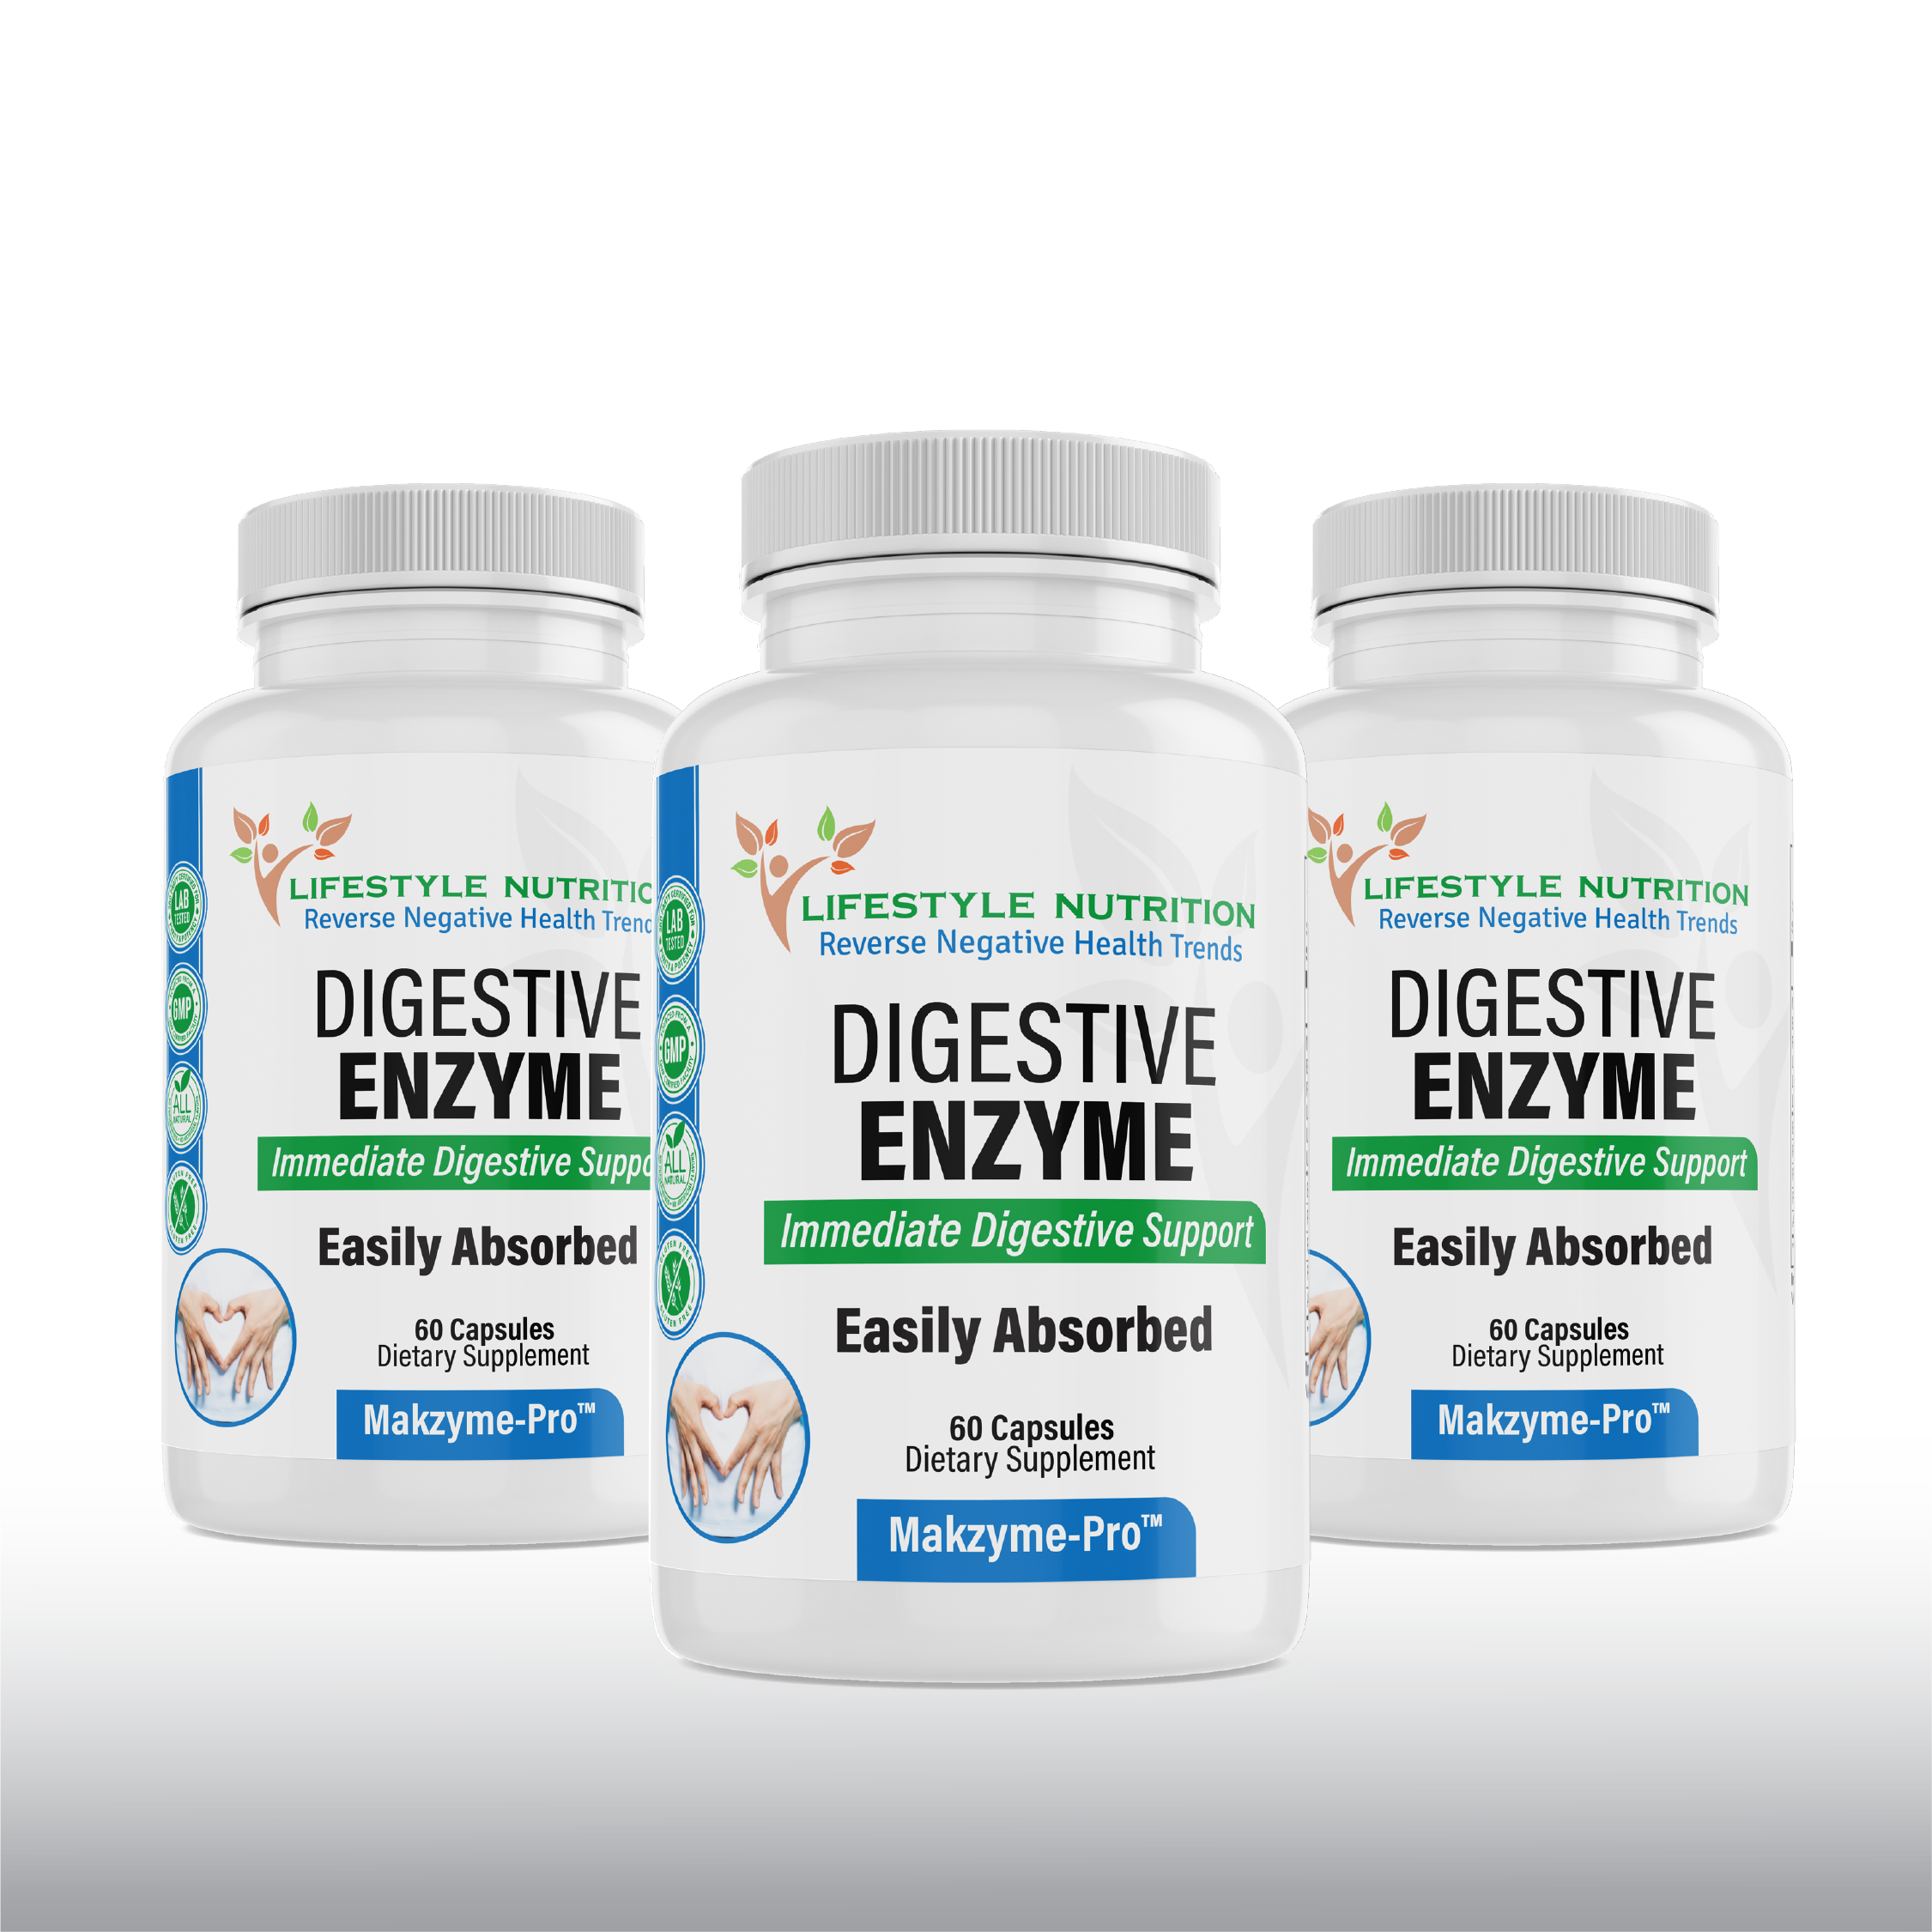 DIGESTIVE ENZYME (3-Pack)